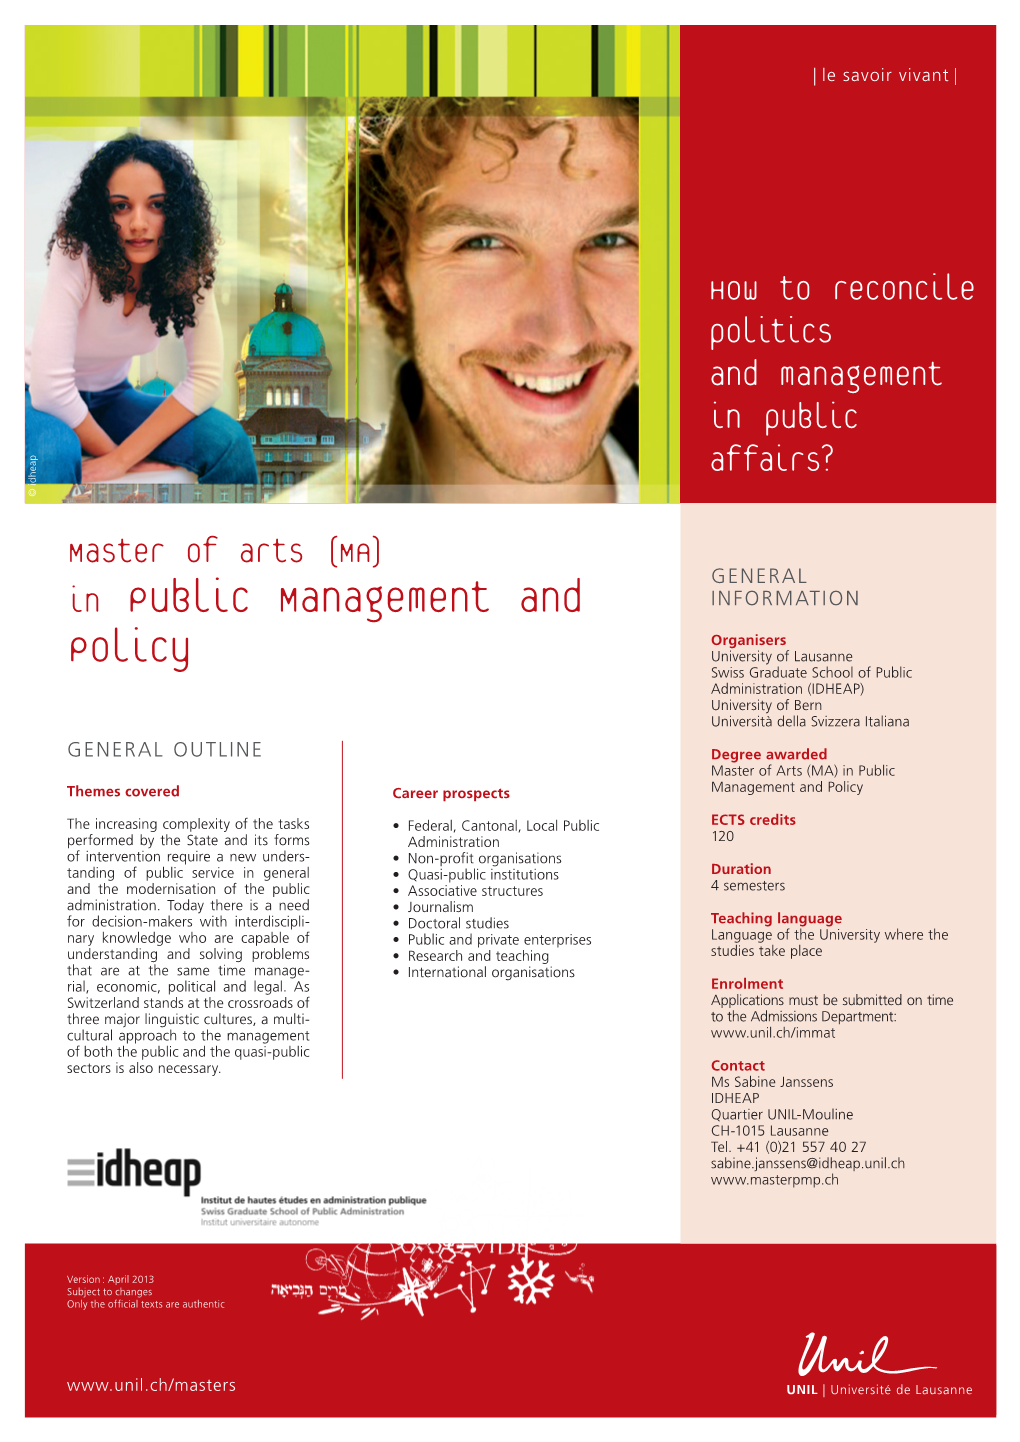 In Public Management and Policy